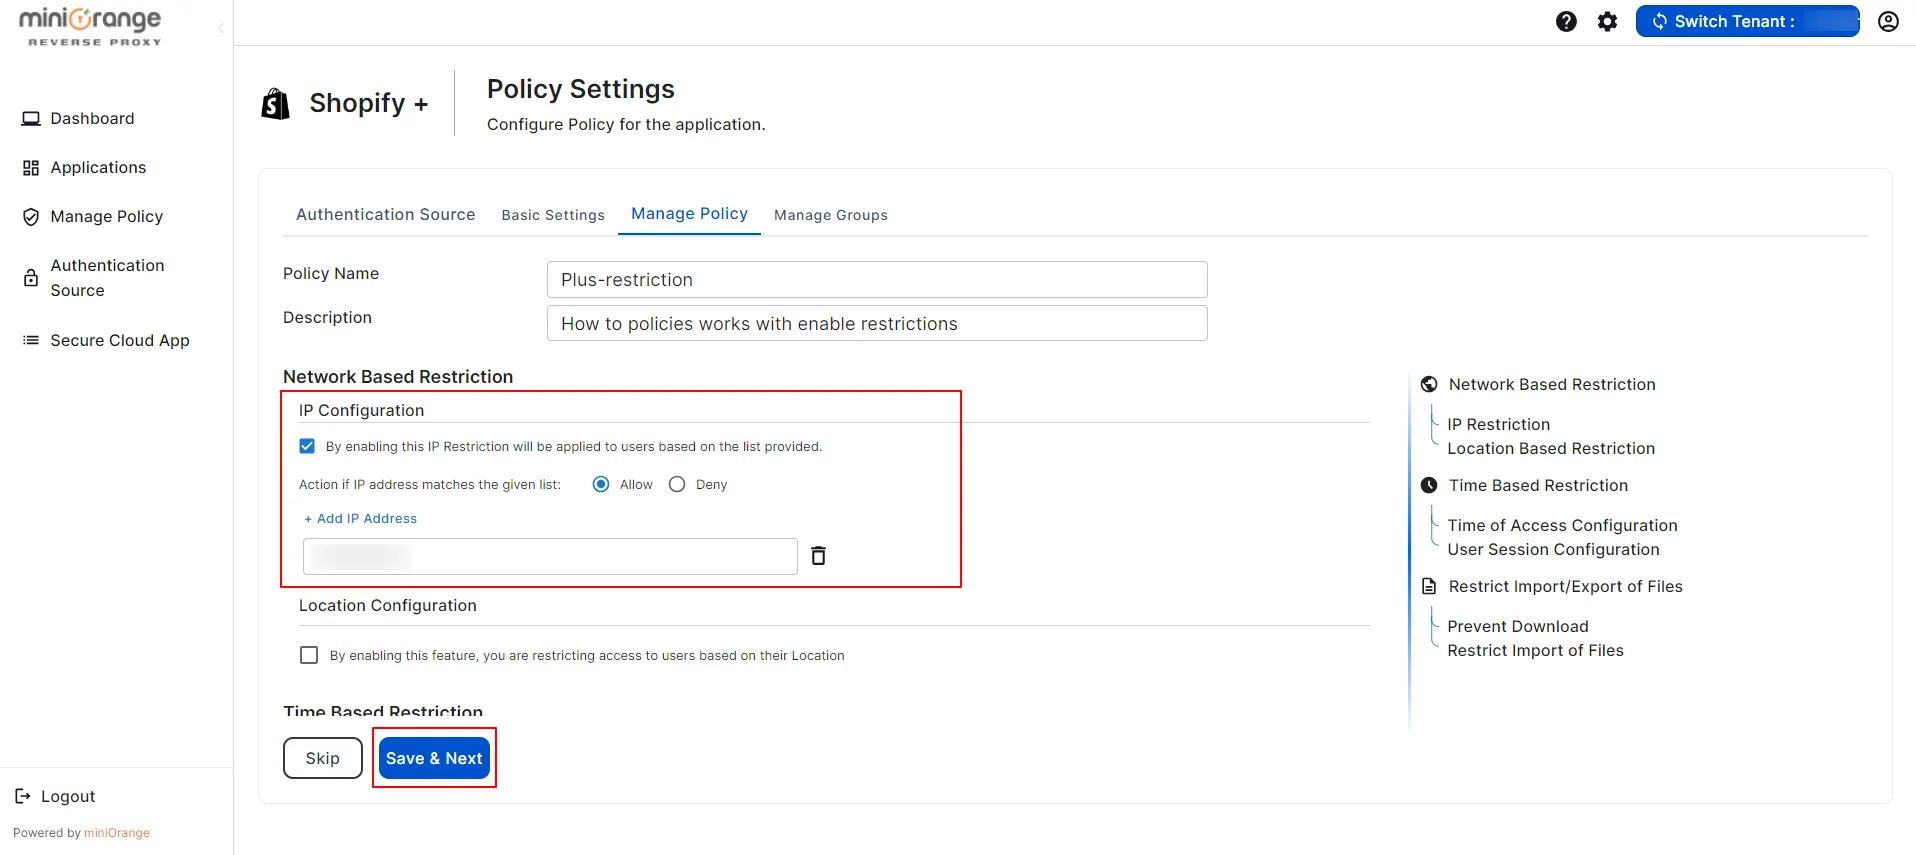 shopify plus CASB policies enable IP Restriction